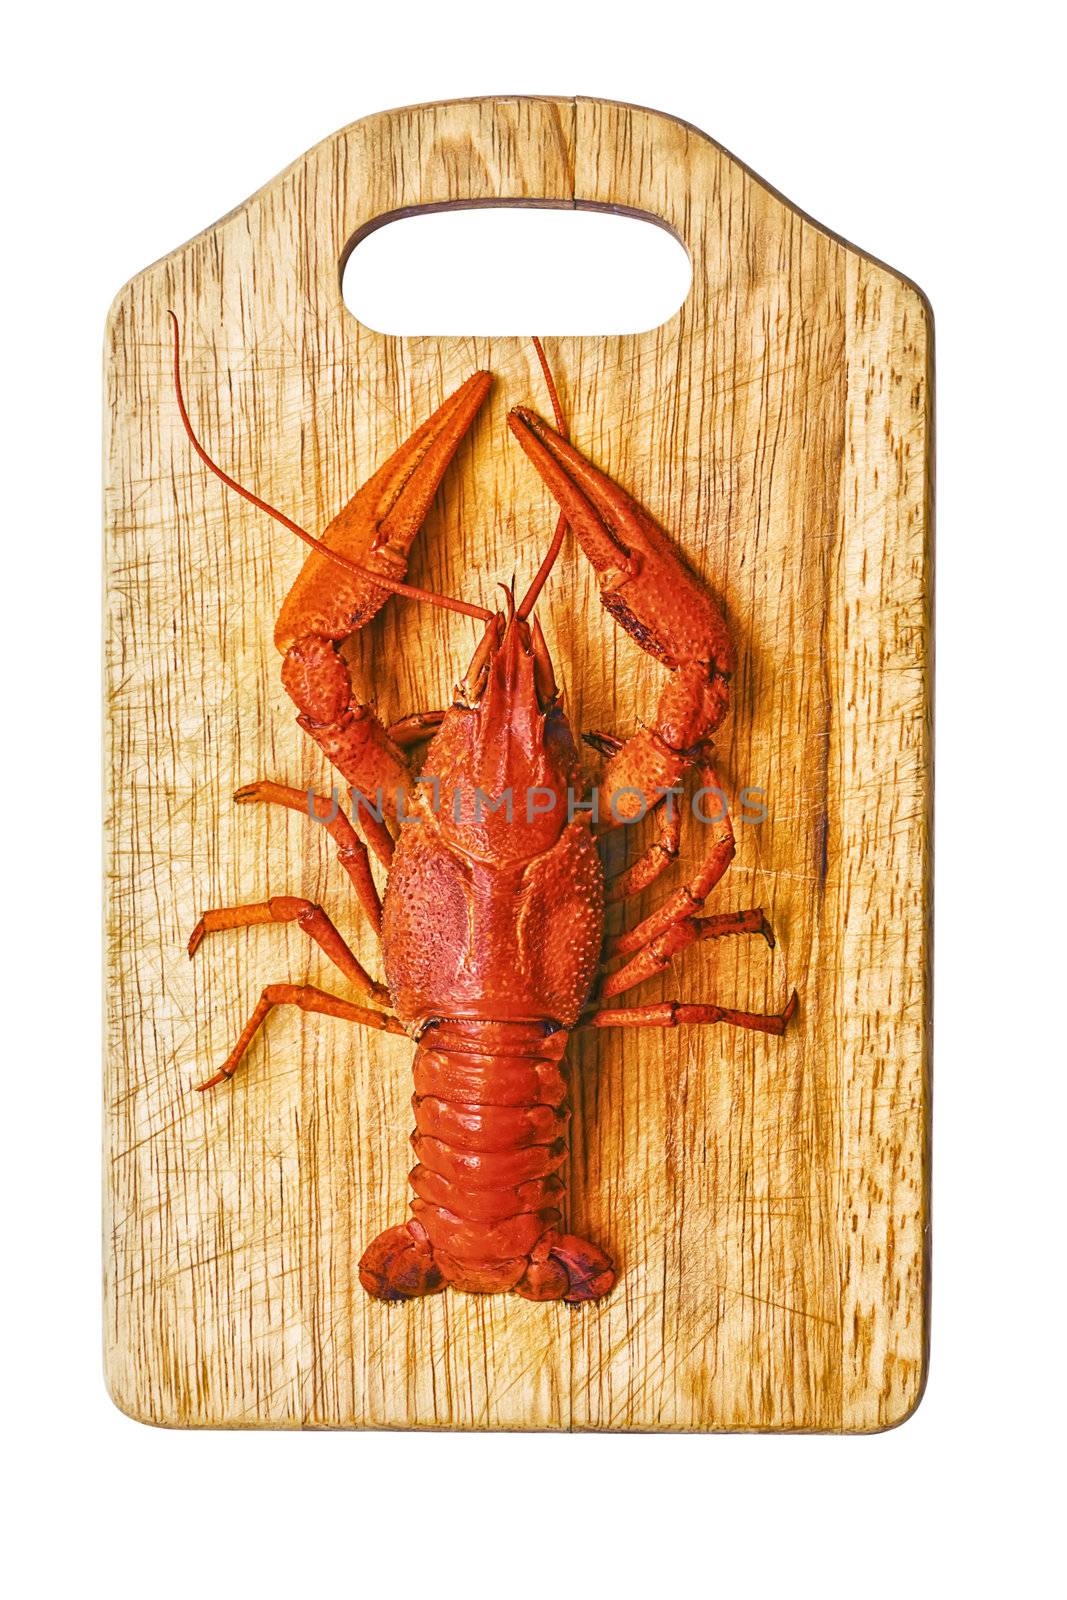 the red lobster on a cutting board